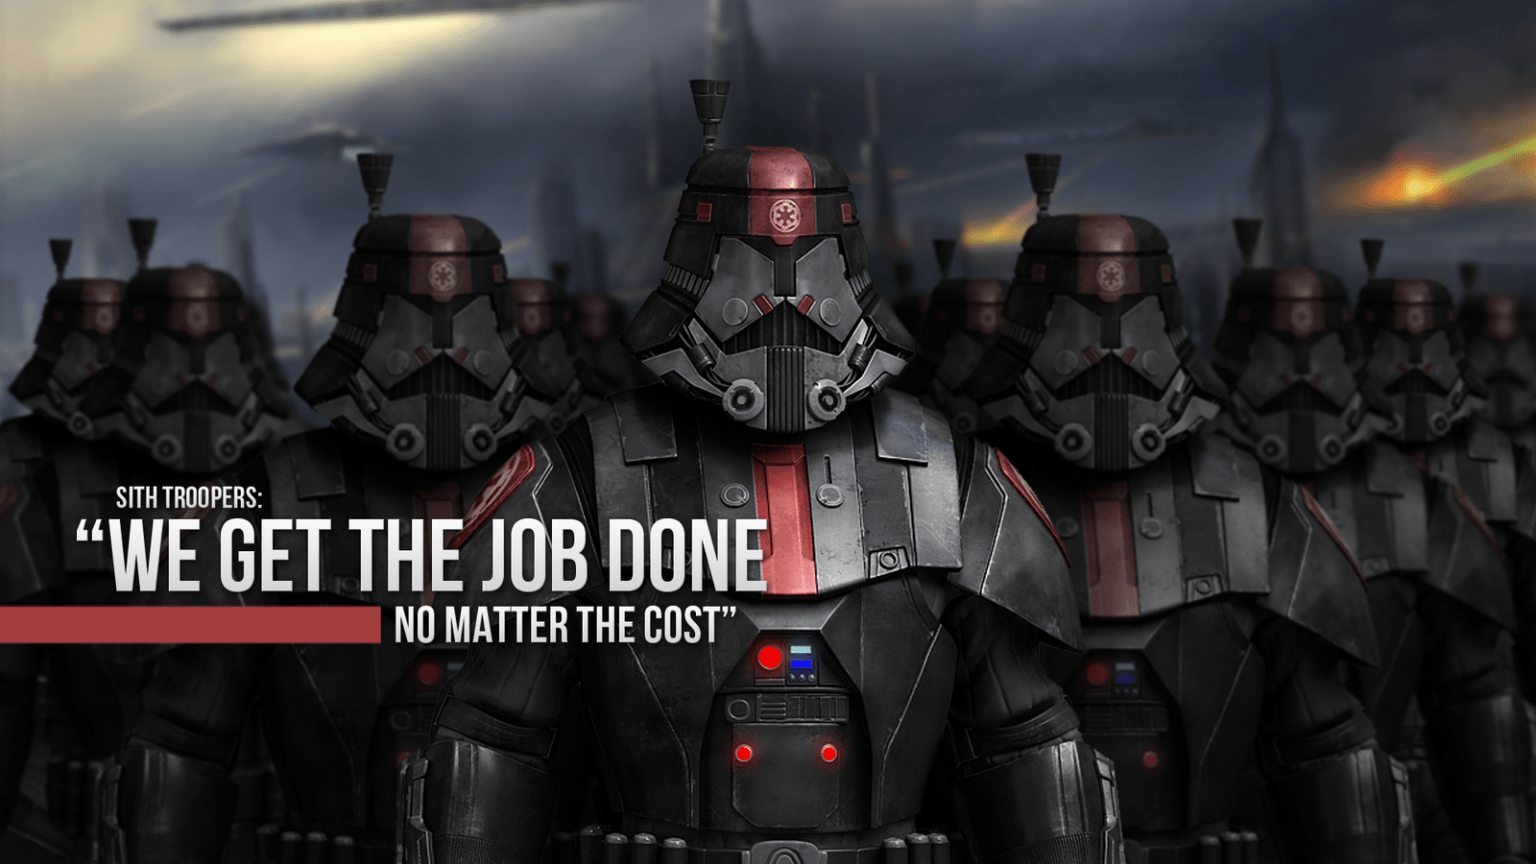 Free download Sith Wallpapers 1080p Sith troopers 1080p by.